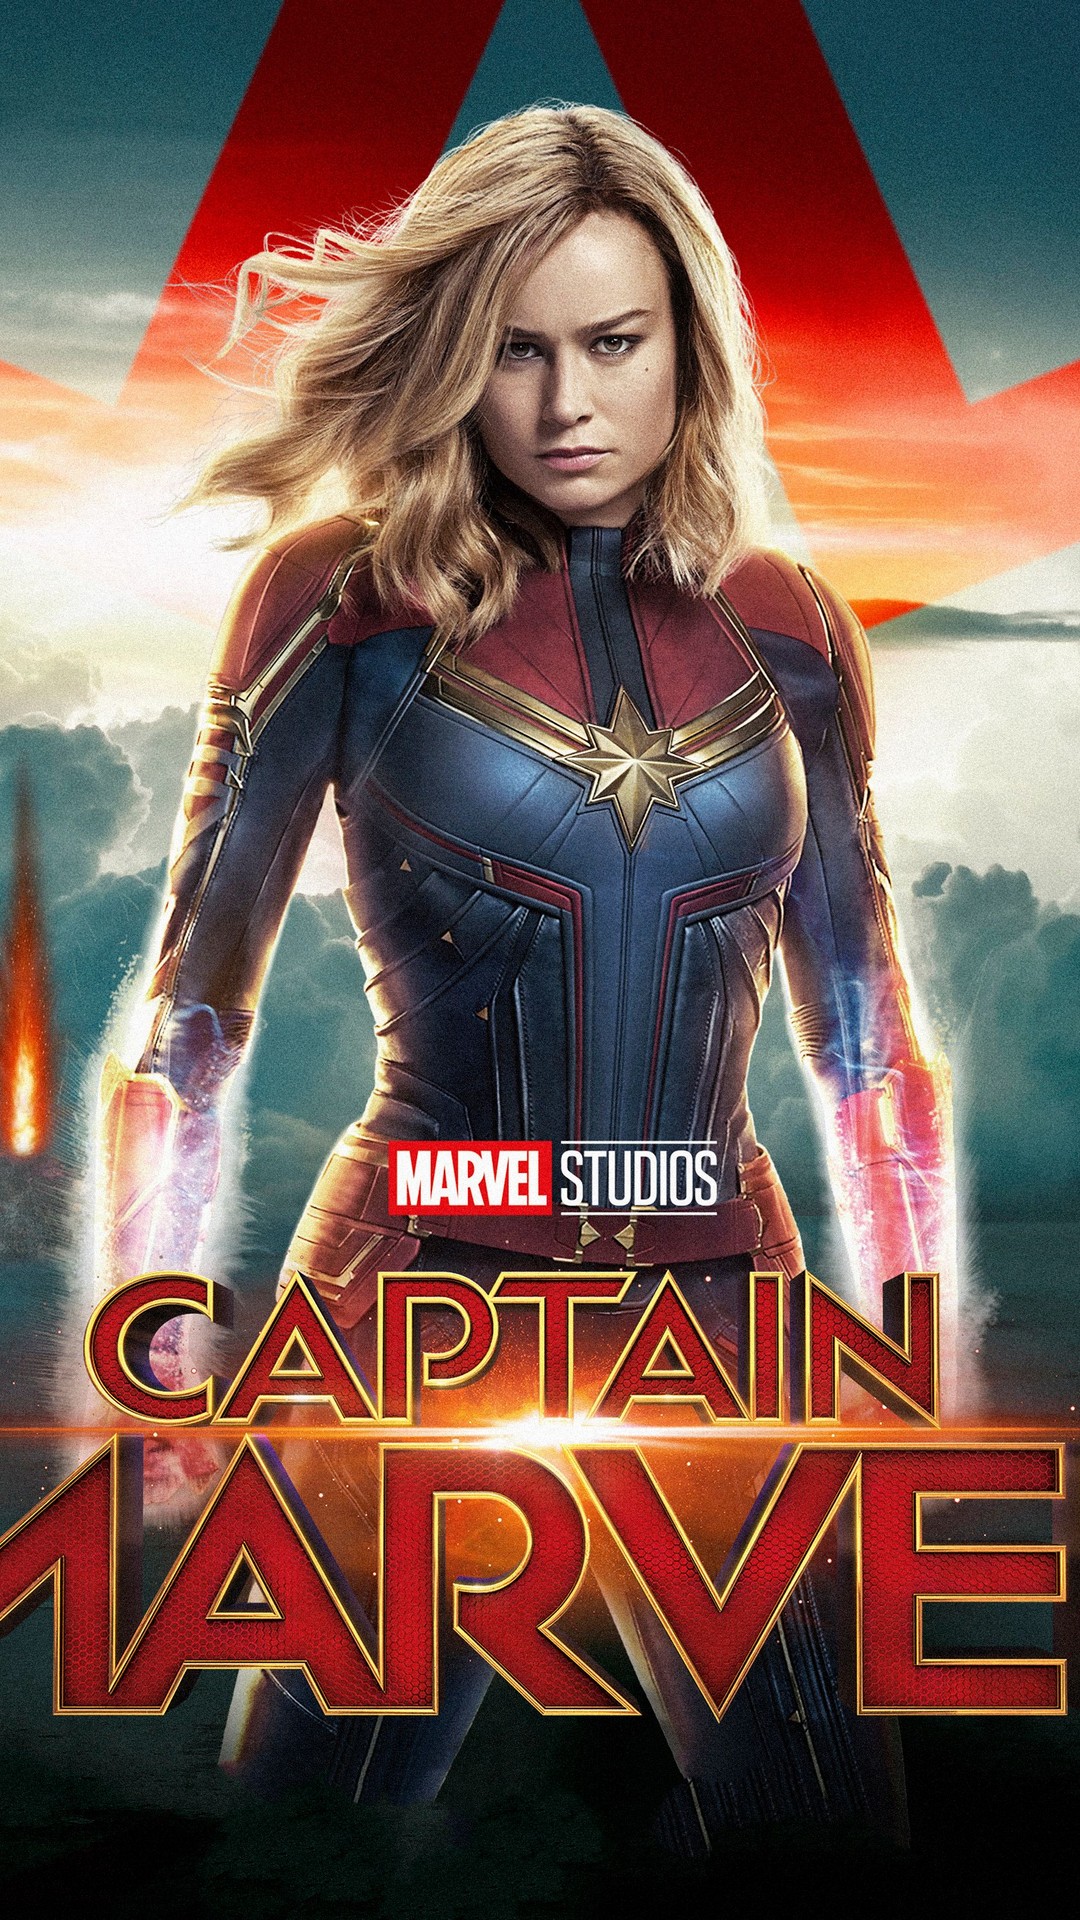 Captain Marvel Wallpaper For Mobile With High-resolution - Captain Marvel Wallpaper Phone - HD Wallpaper 